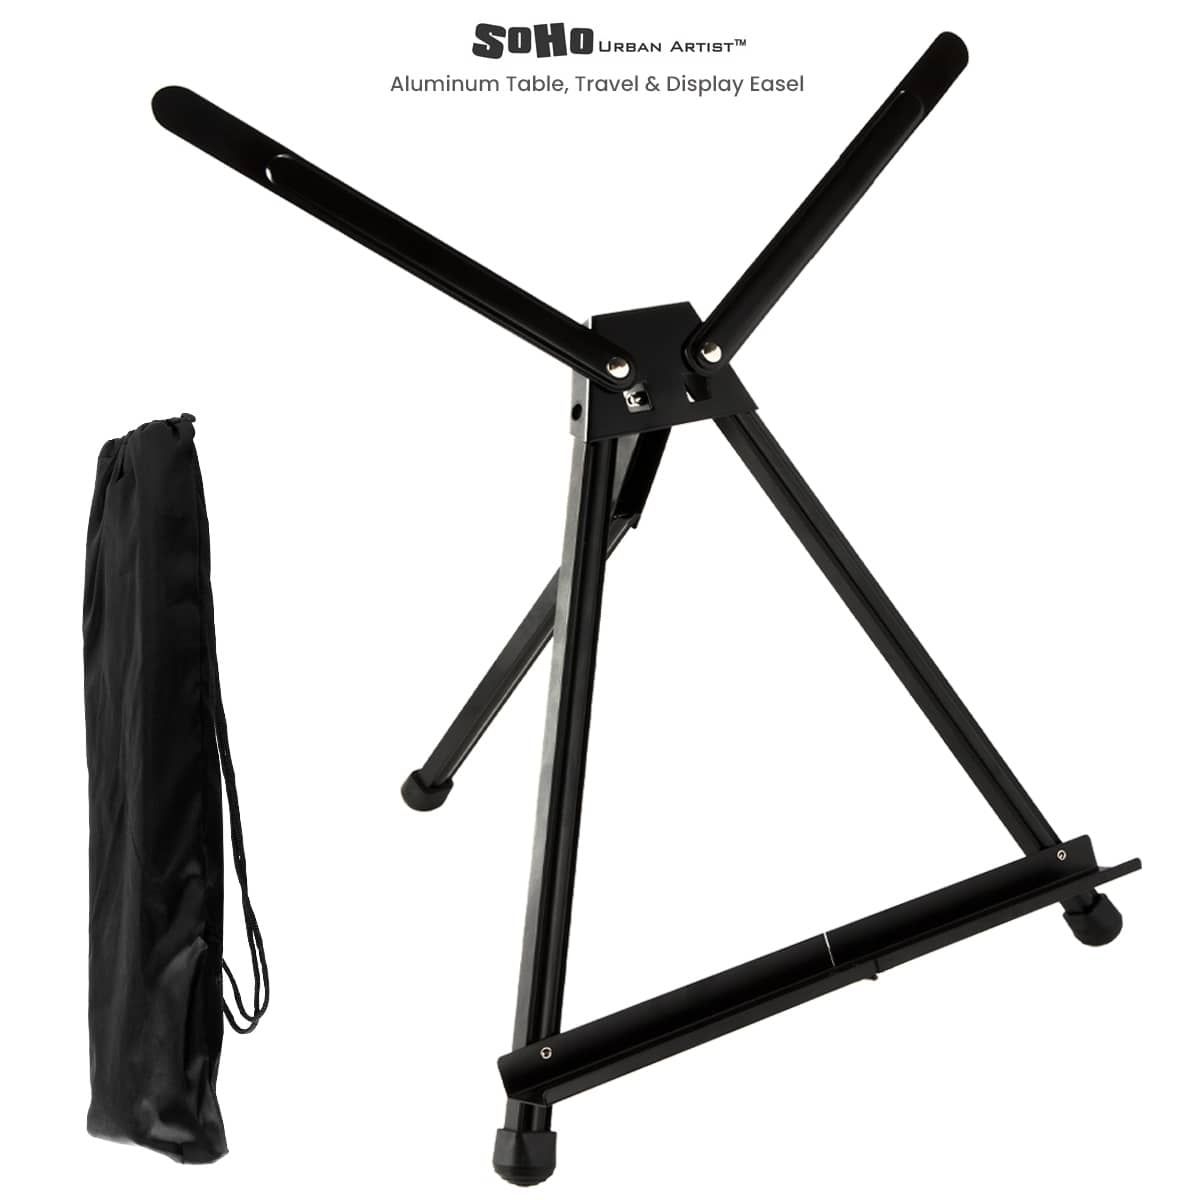 Hold Art 15" High Aluminum Tabletop Display Easel Portable Artist Tripod Stand 